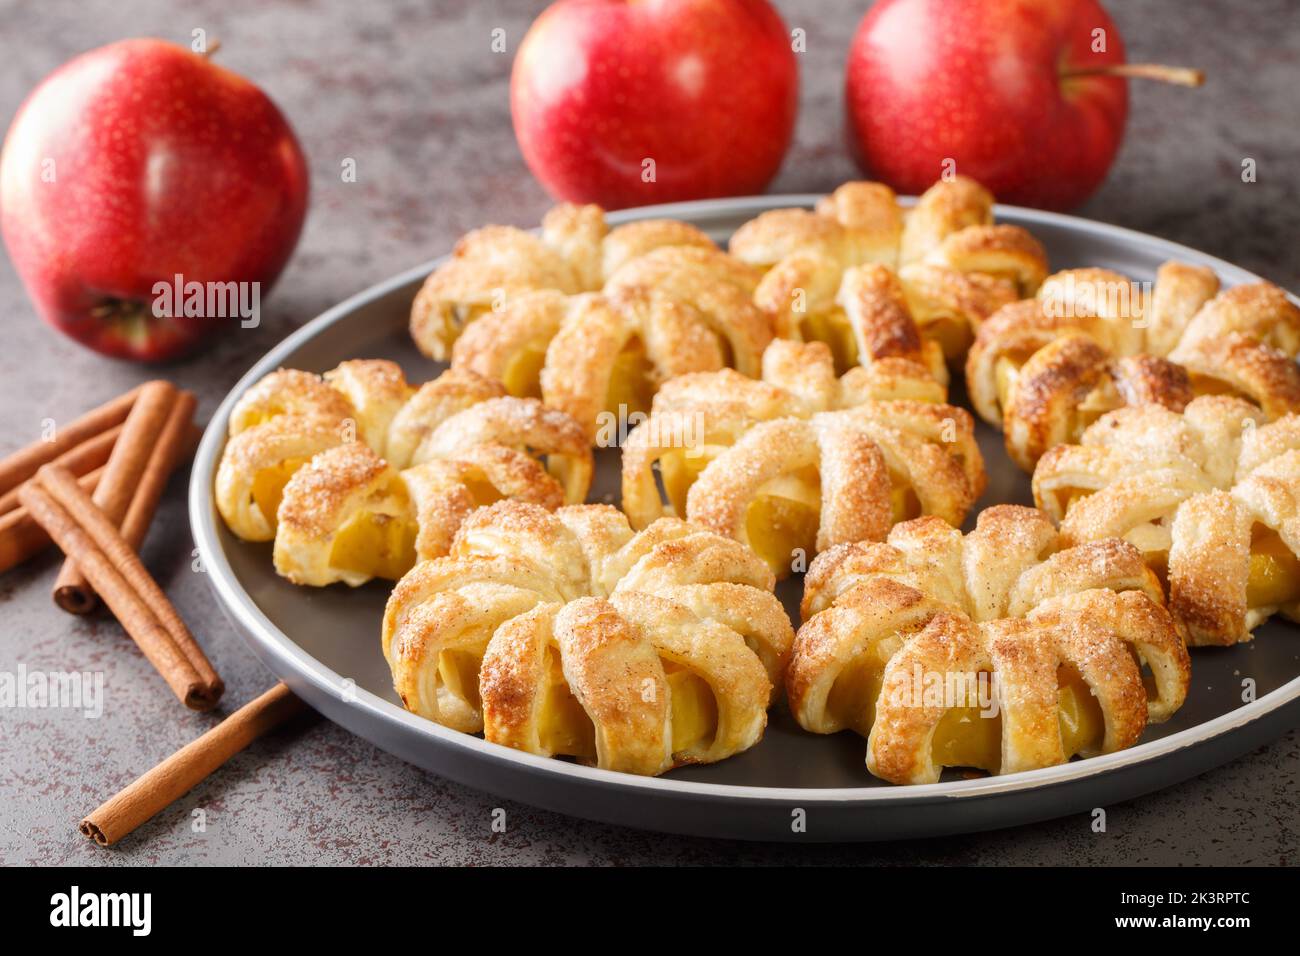 Autumn dessert Apple puff pastry with sugar and cinnamon close-up in a plate on the table. Horizontal Stock Photo